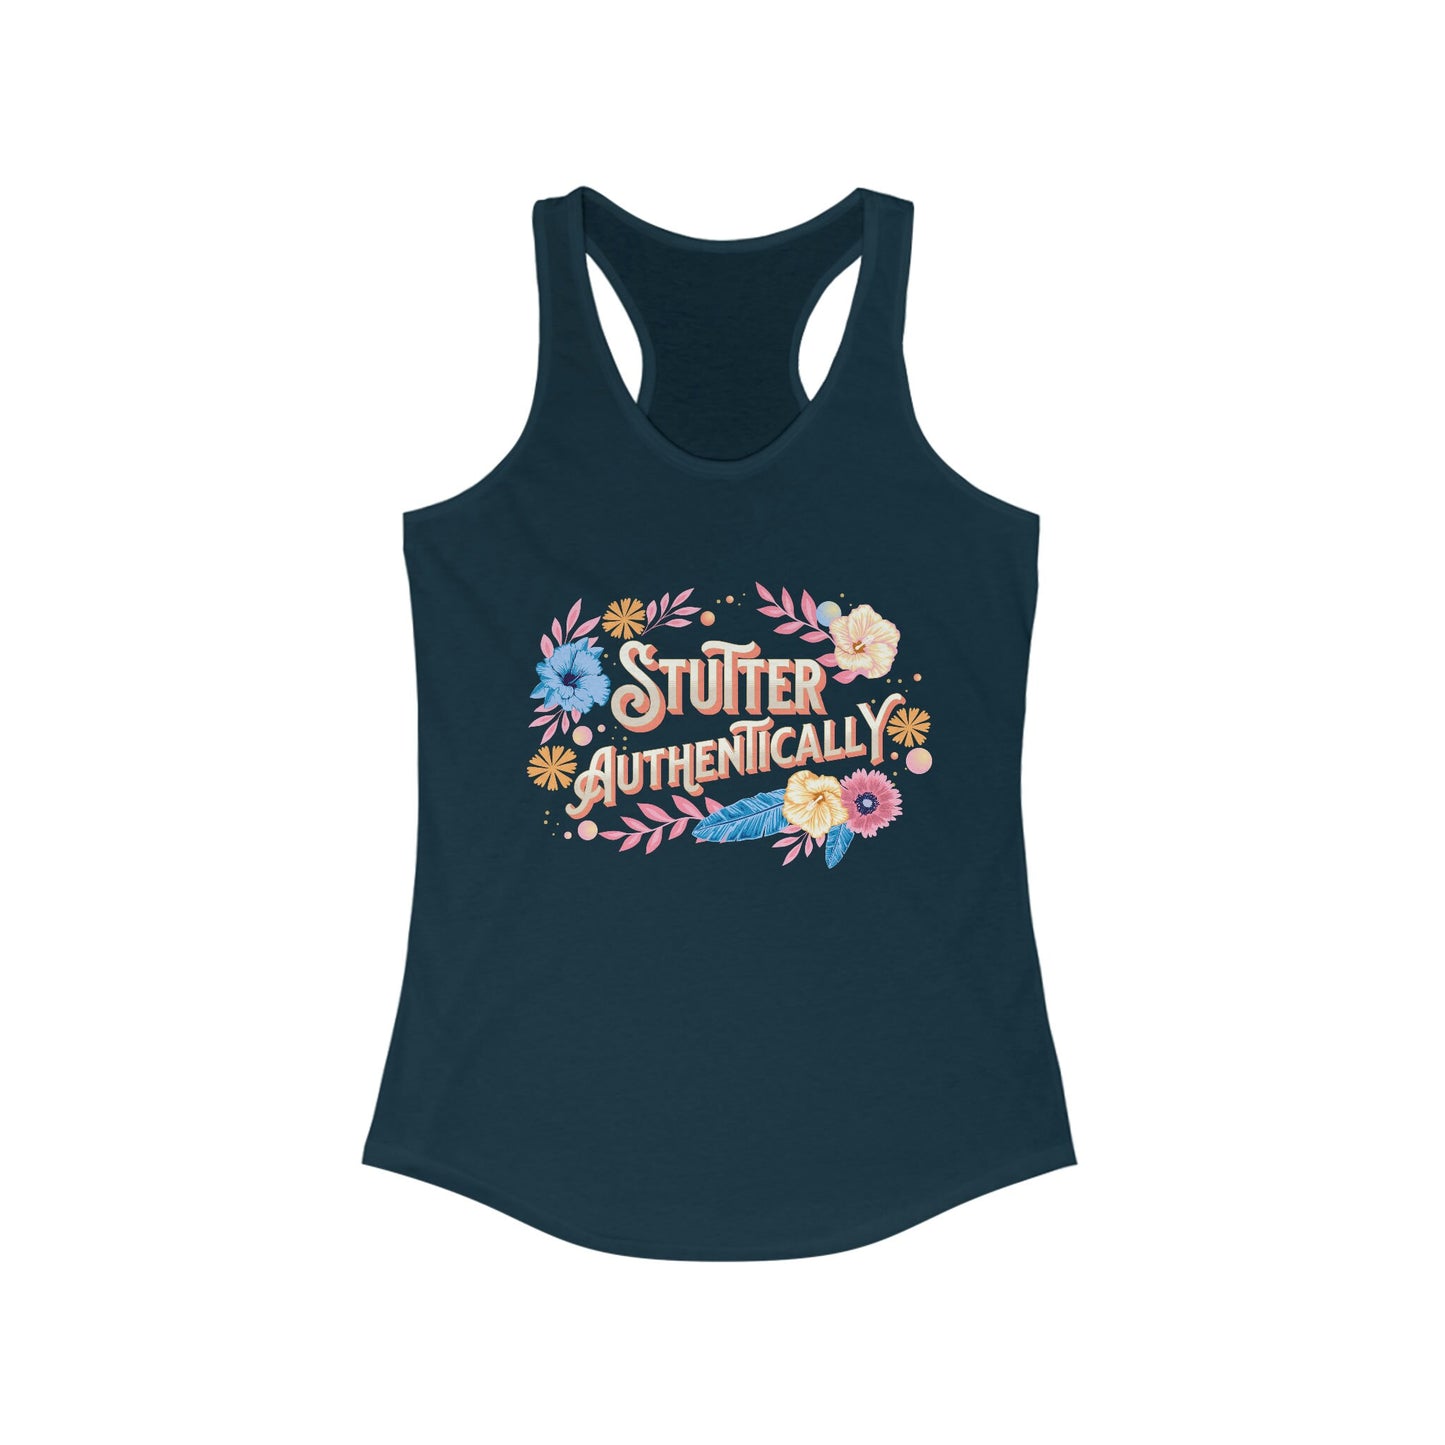 Women's Racerback Stuttering Tank Top, Team Stuttering, Stutter Authentically, Normalize Stuttering, Gift for woman who stutters, SLP